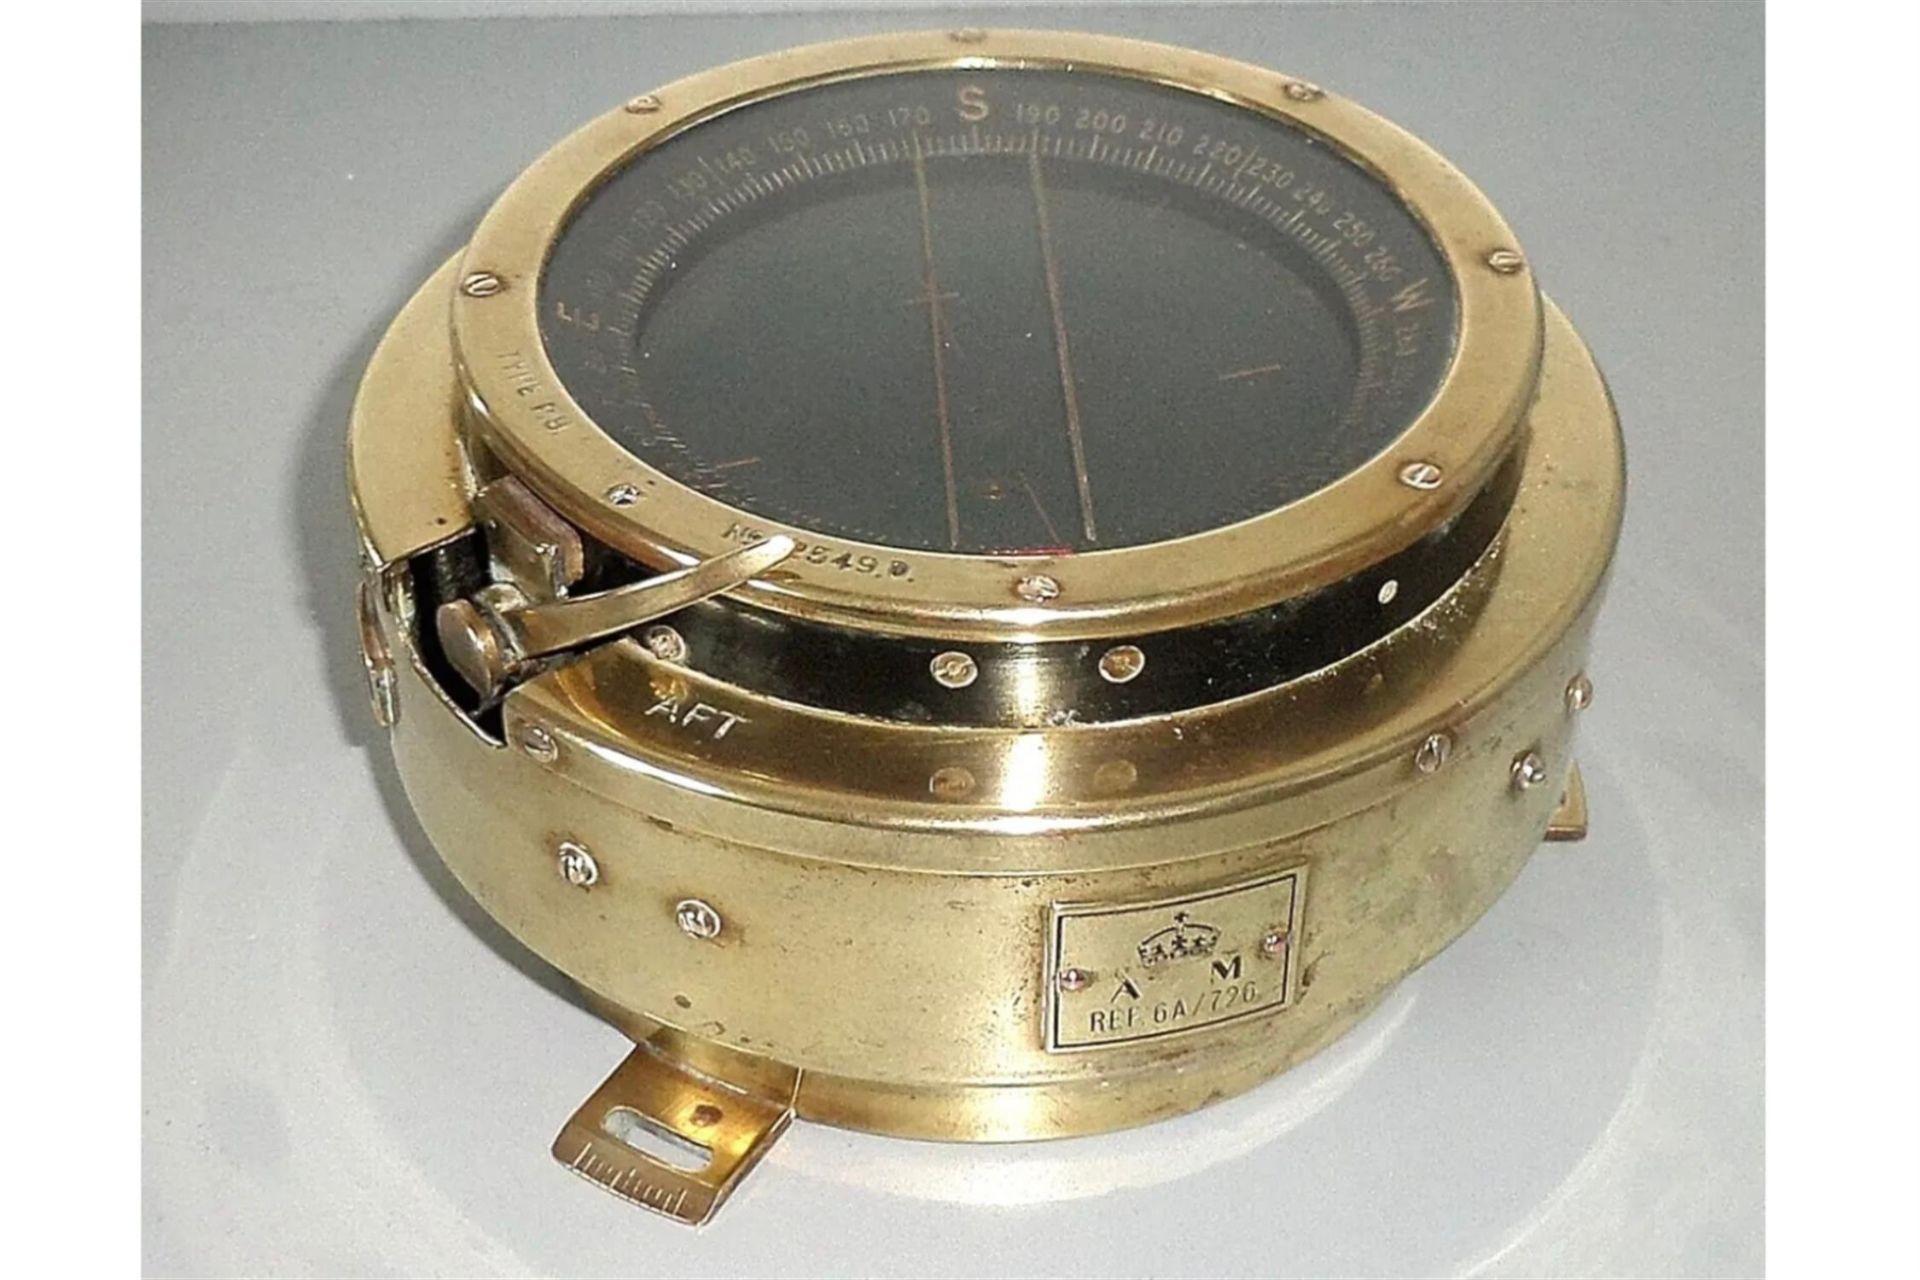 WWII Spitfire Compass- Air Ministry, Type P-8 REF. 6A/726 dating to 1943